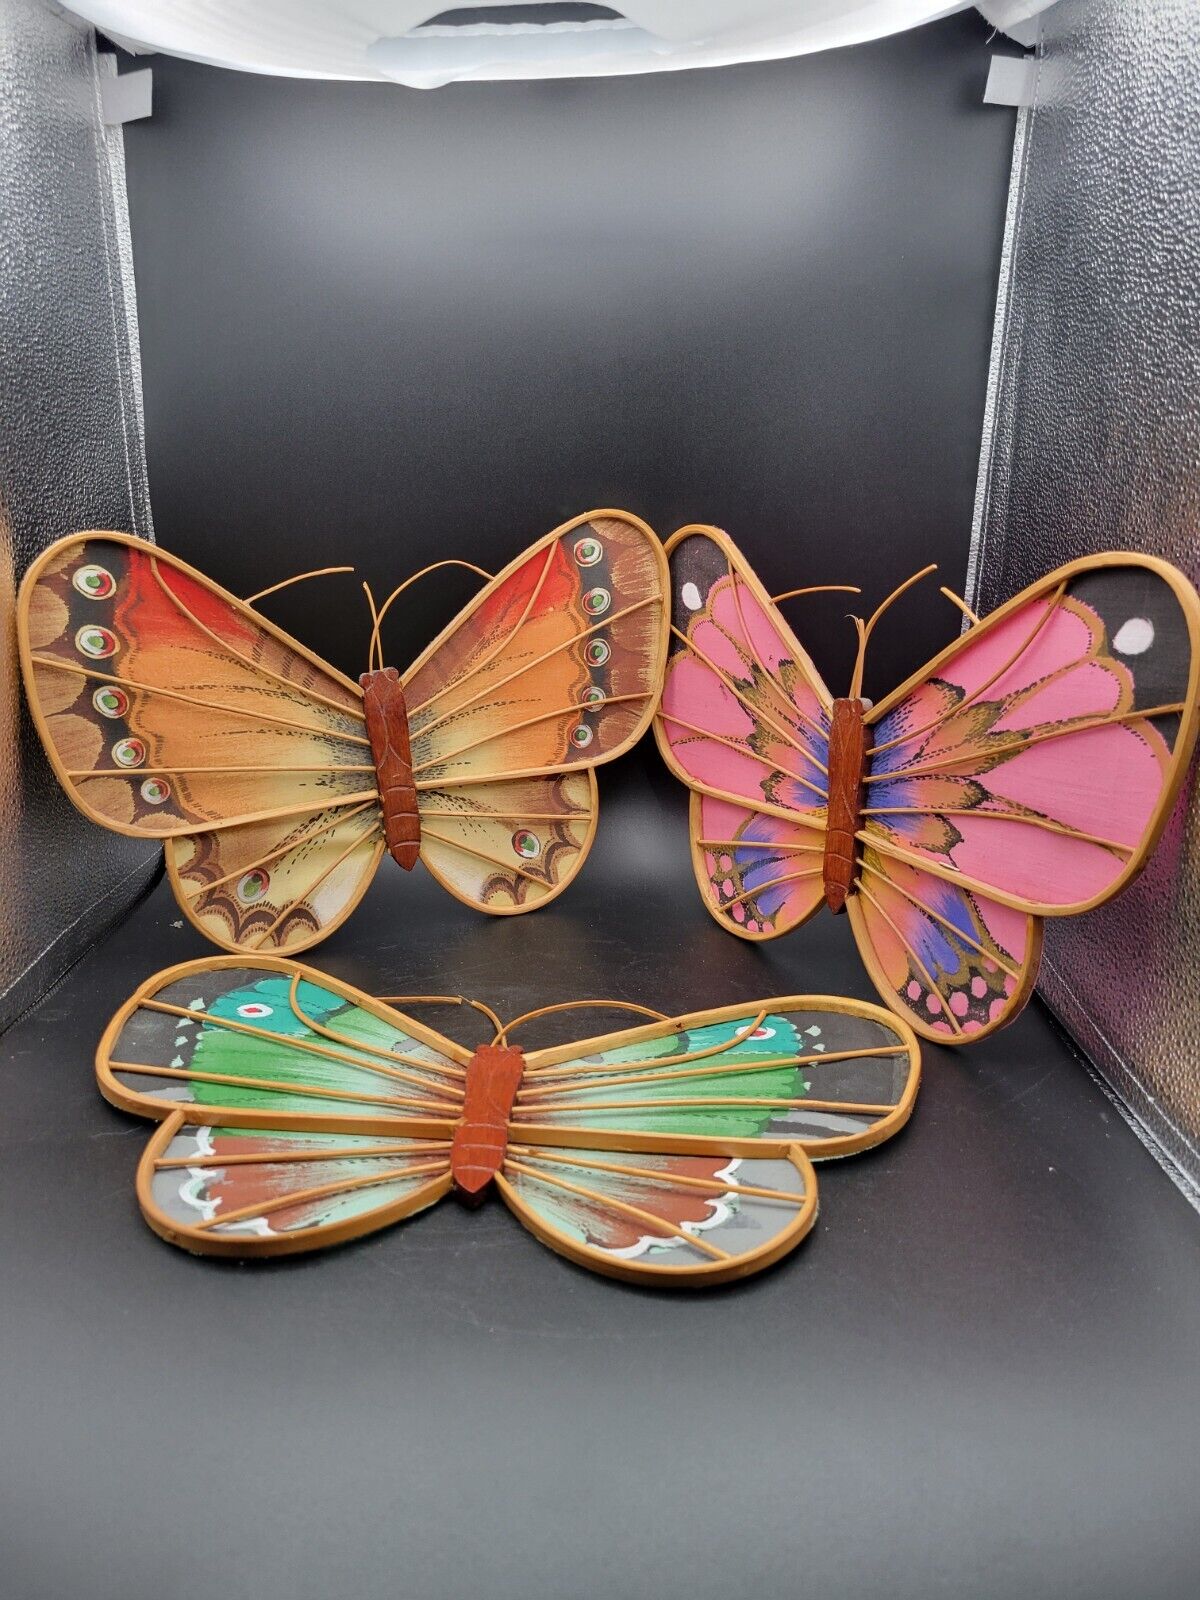 Vintage Bentwood Bamboo Butterfly Wall Hangings Decor Fabric Wings Set 3